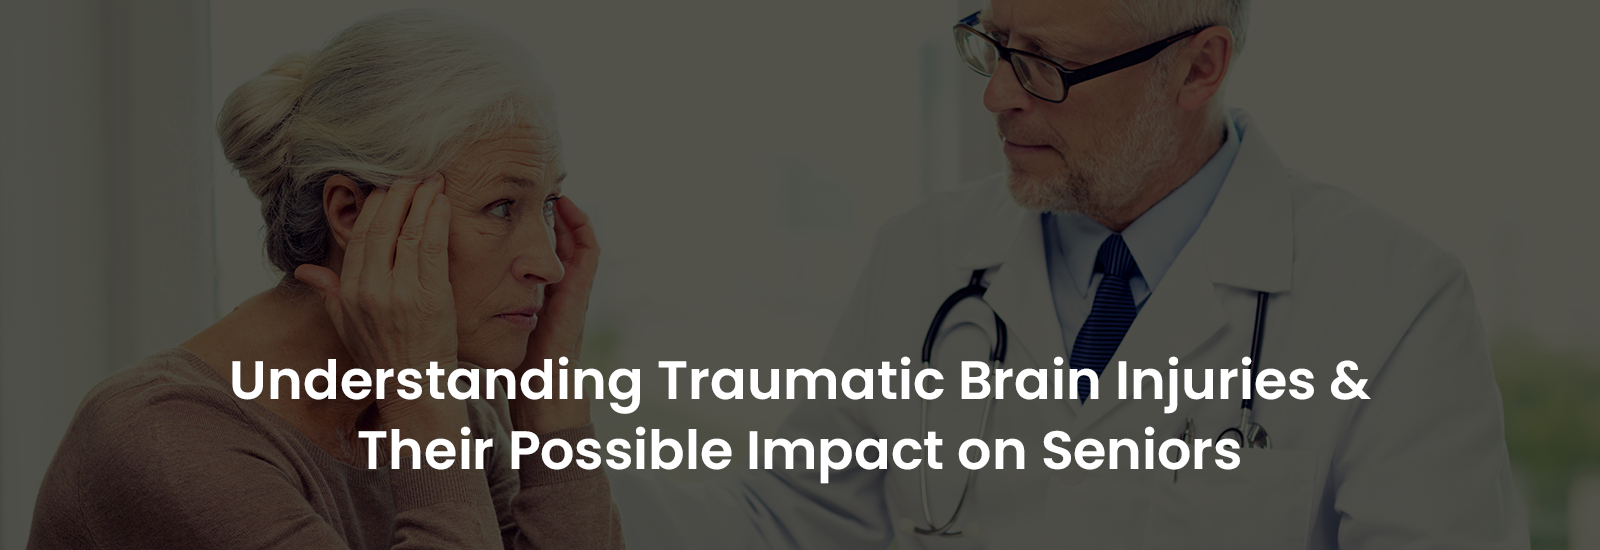 Understanding Traumatic Brain Injuries & Their Possible Impact on Seniors | Banner Image